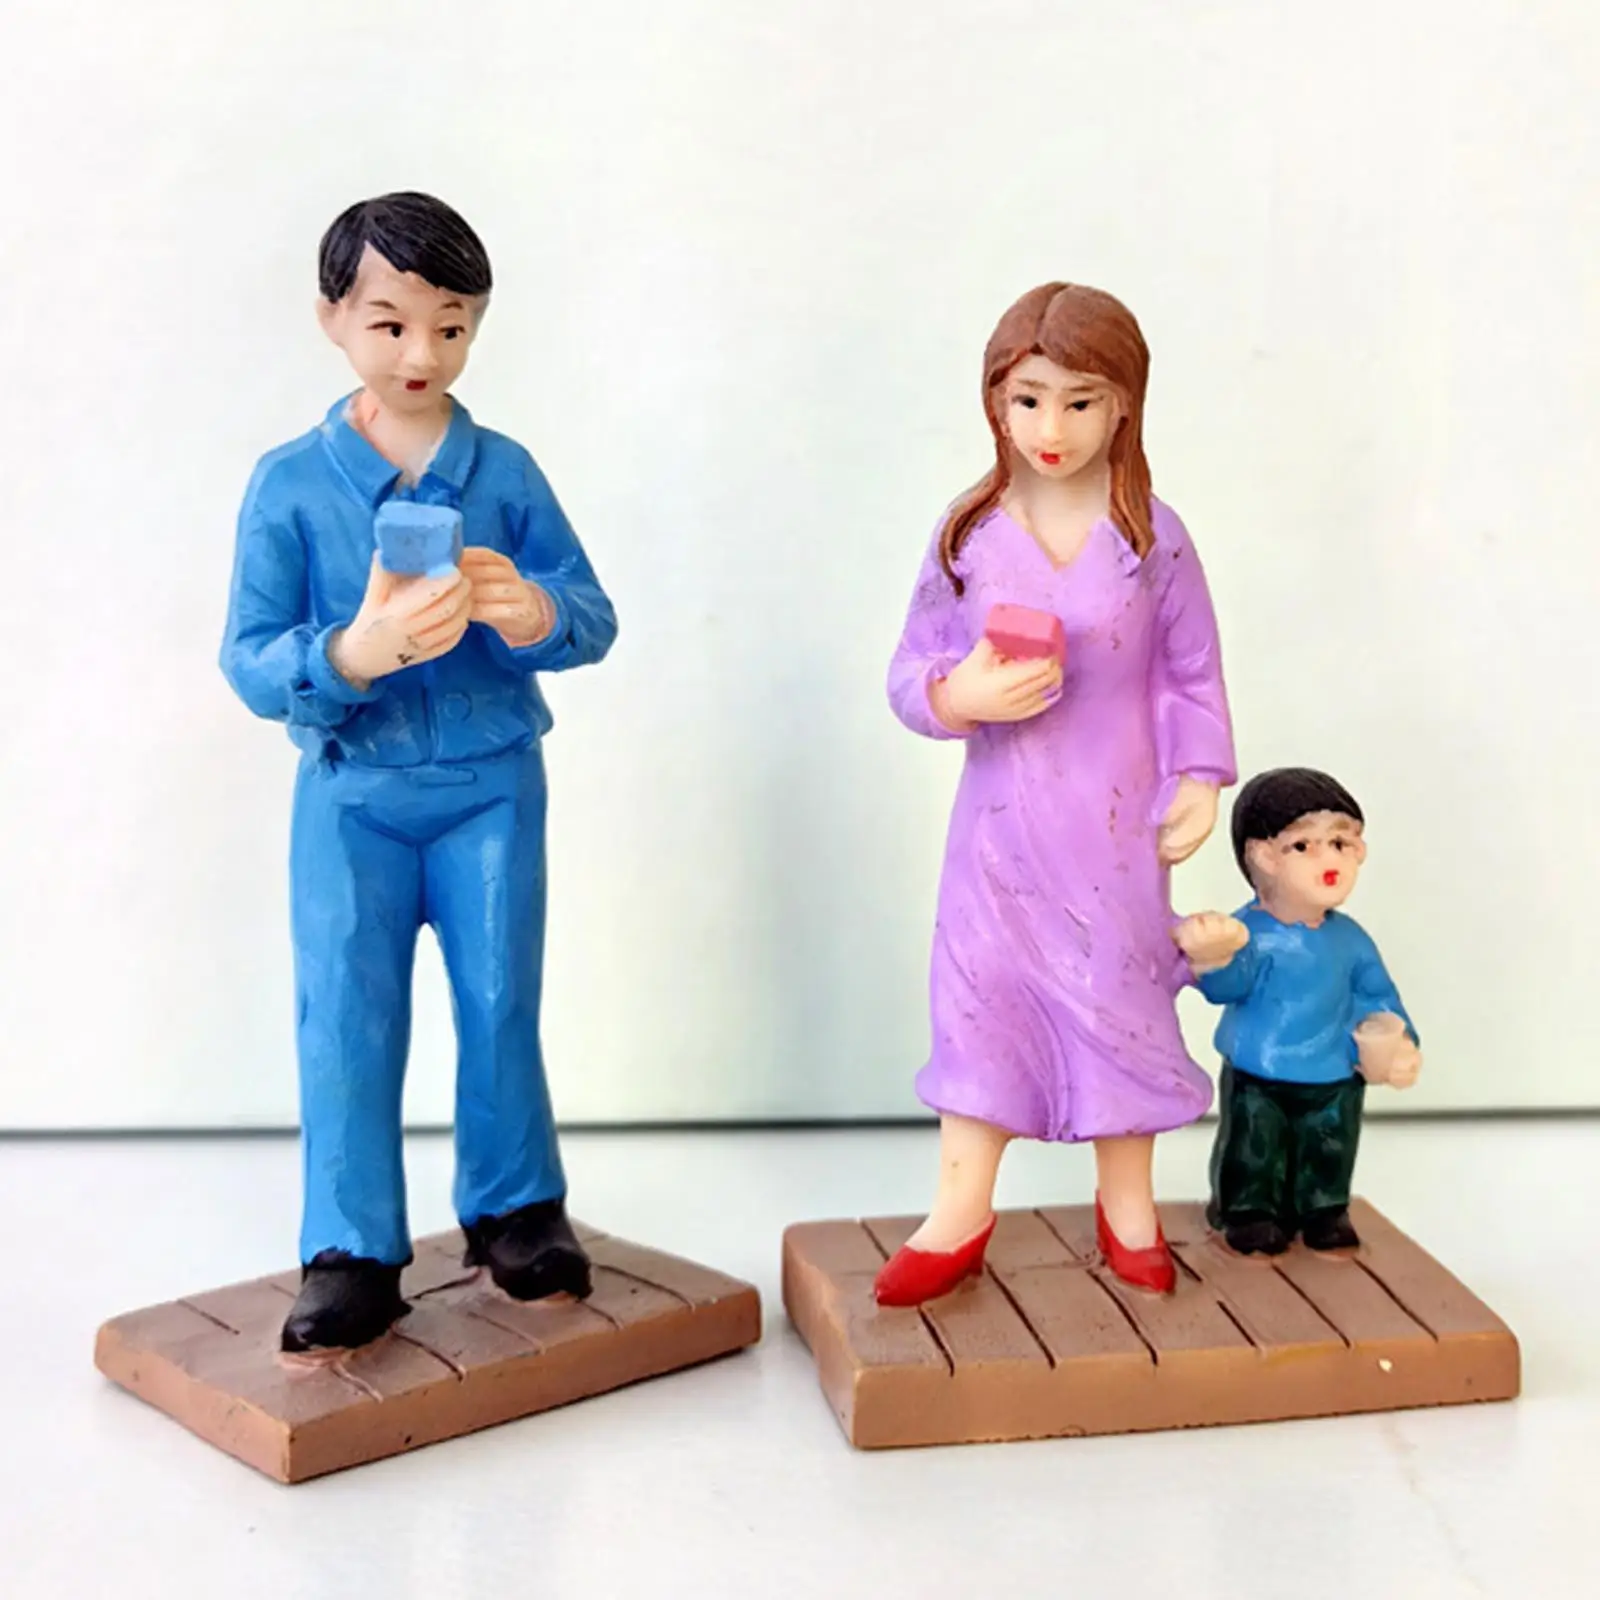 Miniature Family Figures Small Desk Sculpture People Painted Figures for Dollhouse